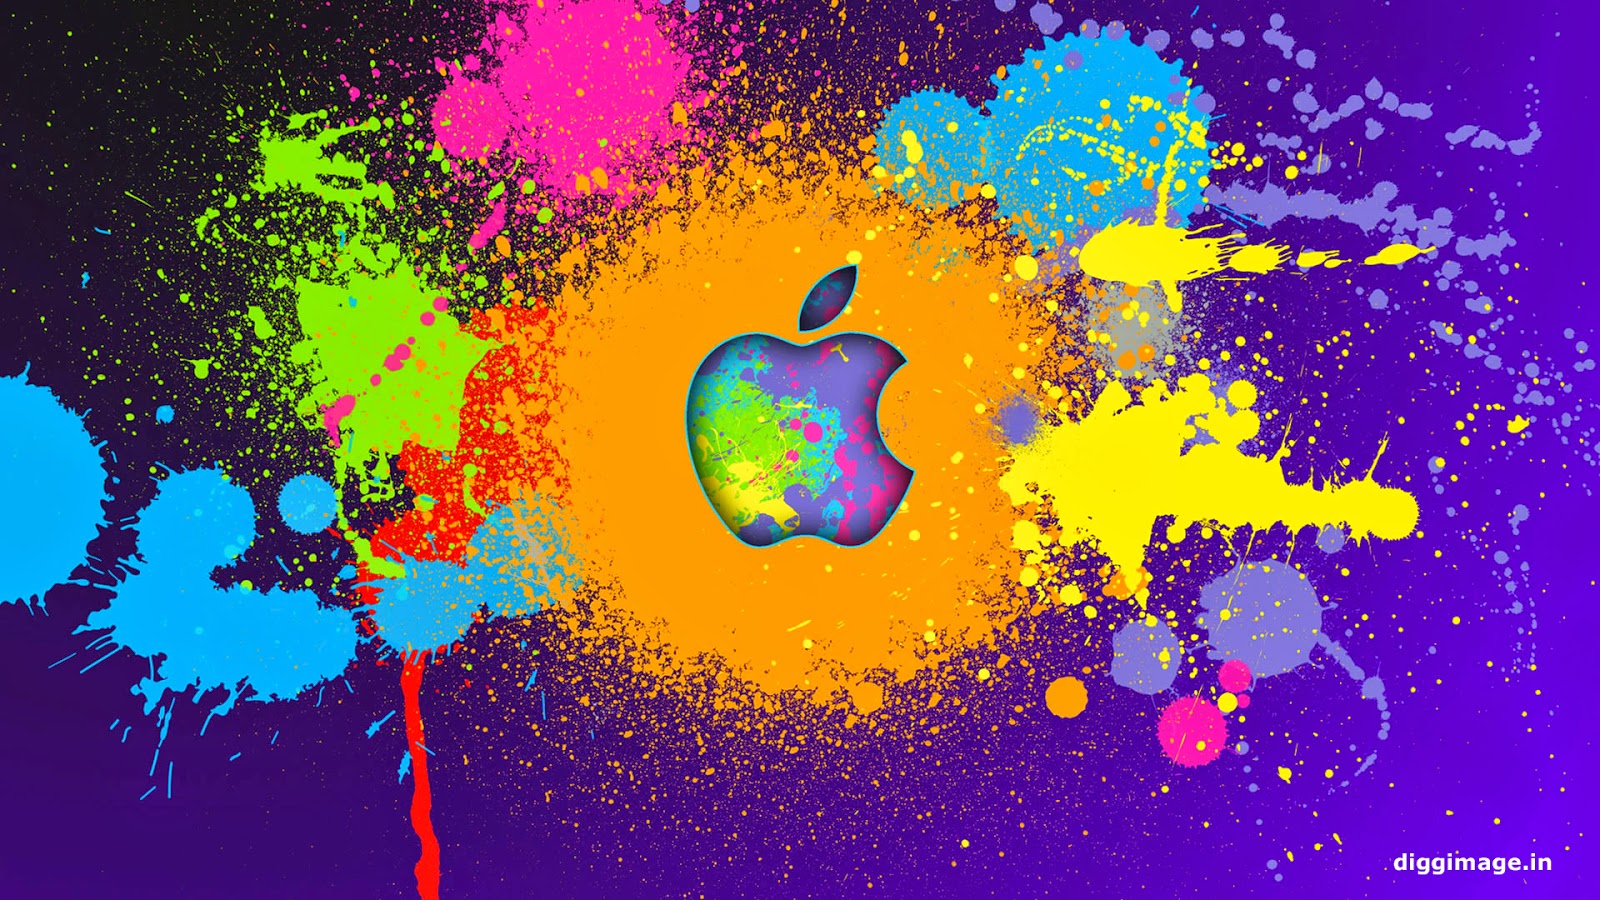 Apple Backgrounds For Computer - 1600x900 Wallpaper 